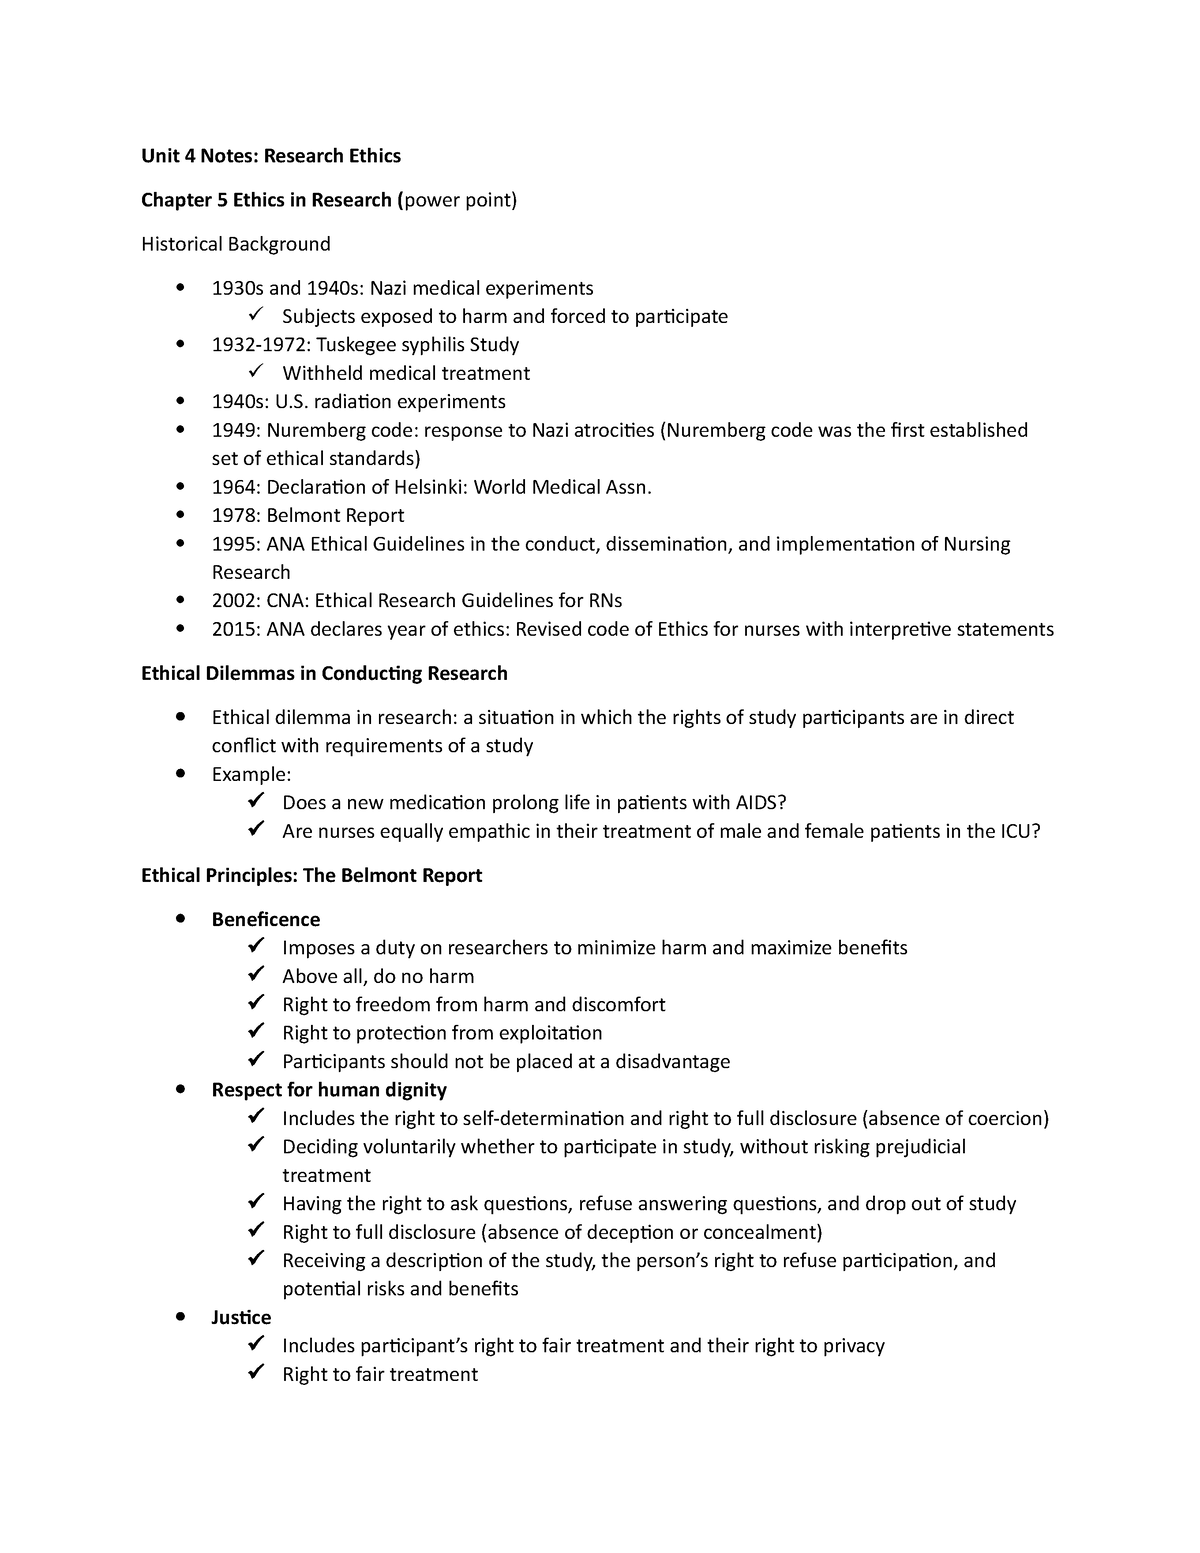 Unit 4 notes and study material - Unit 4 Notes: Research Ethics Chapter ...